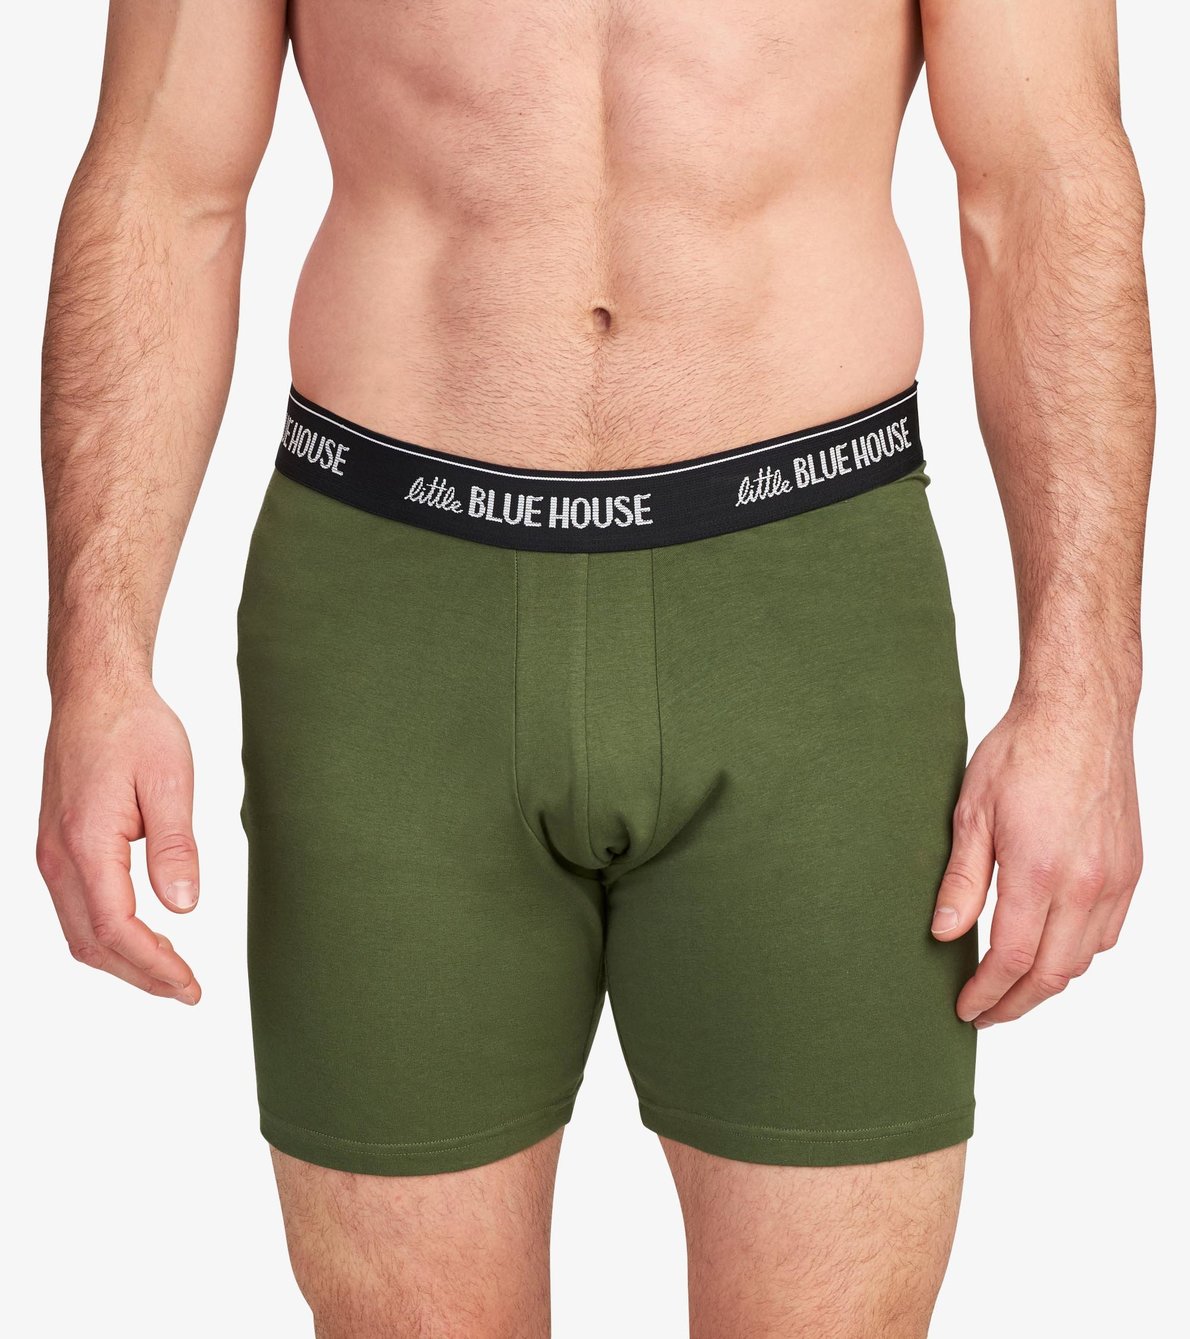 View larger image of Buck Naked Men's Boxer Briefs